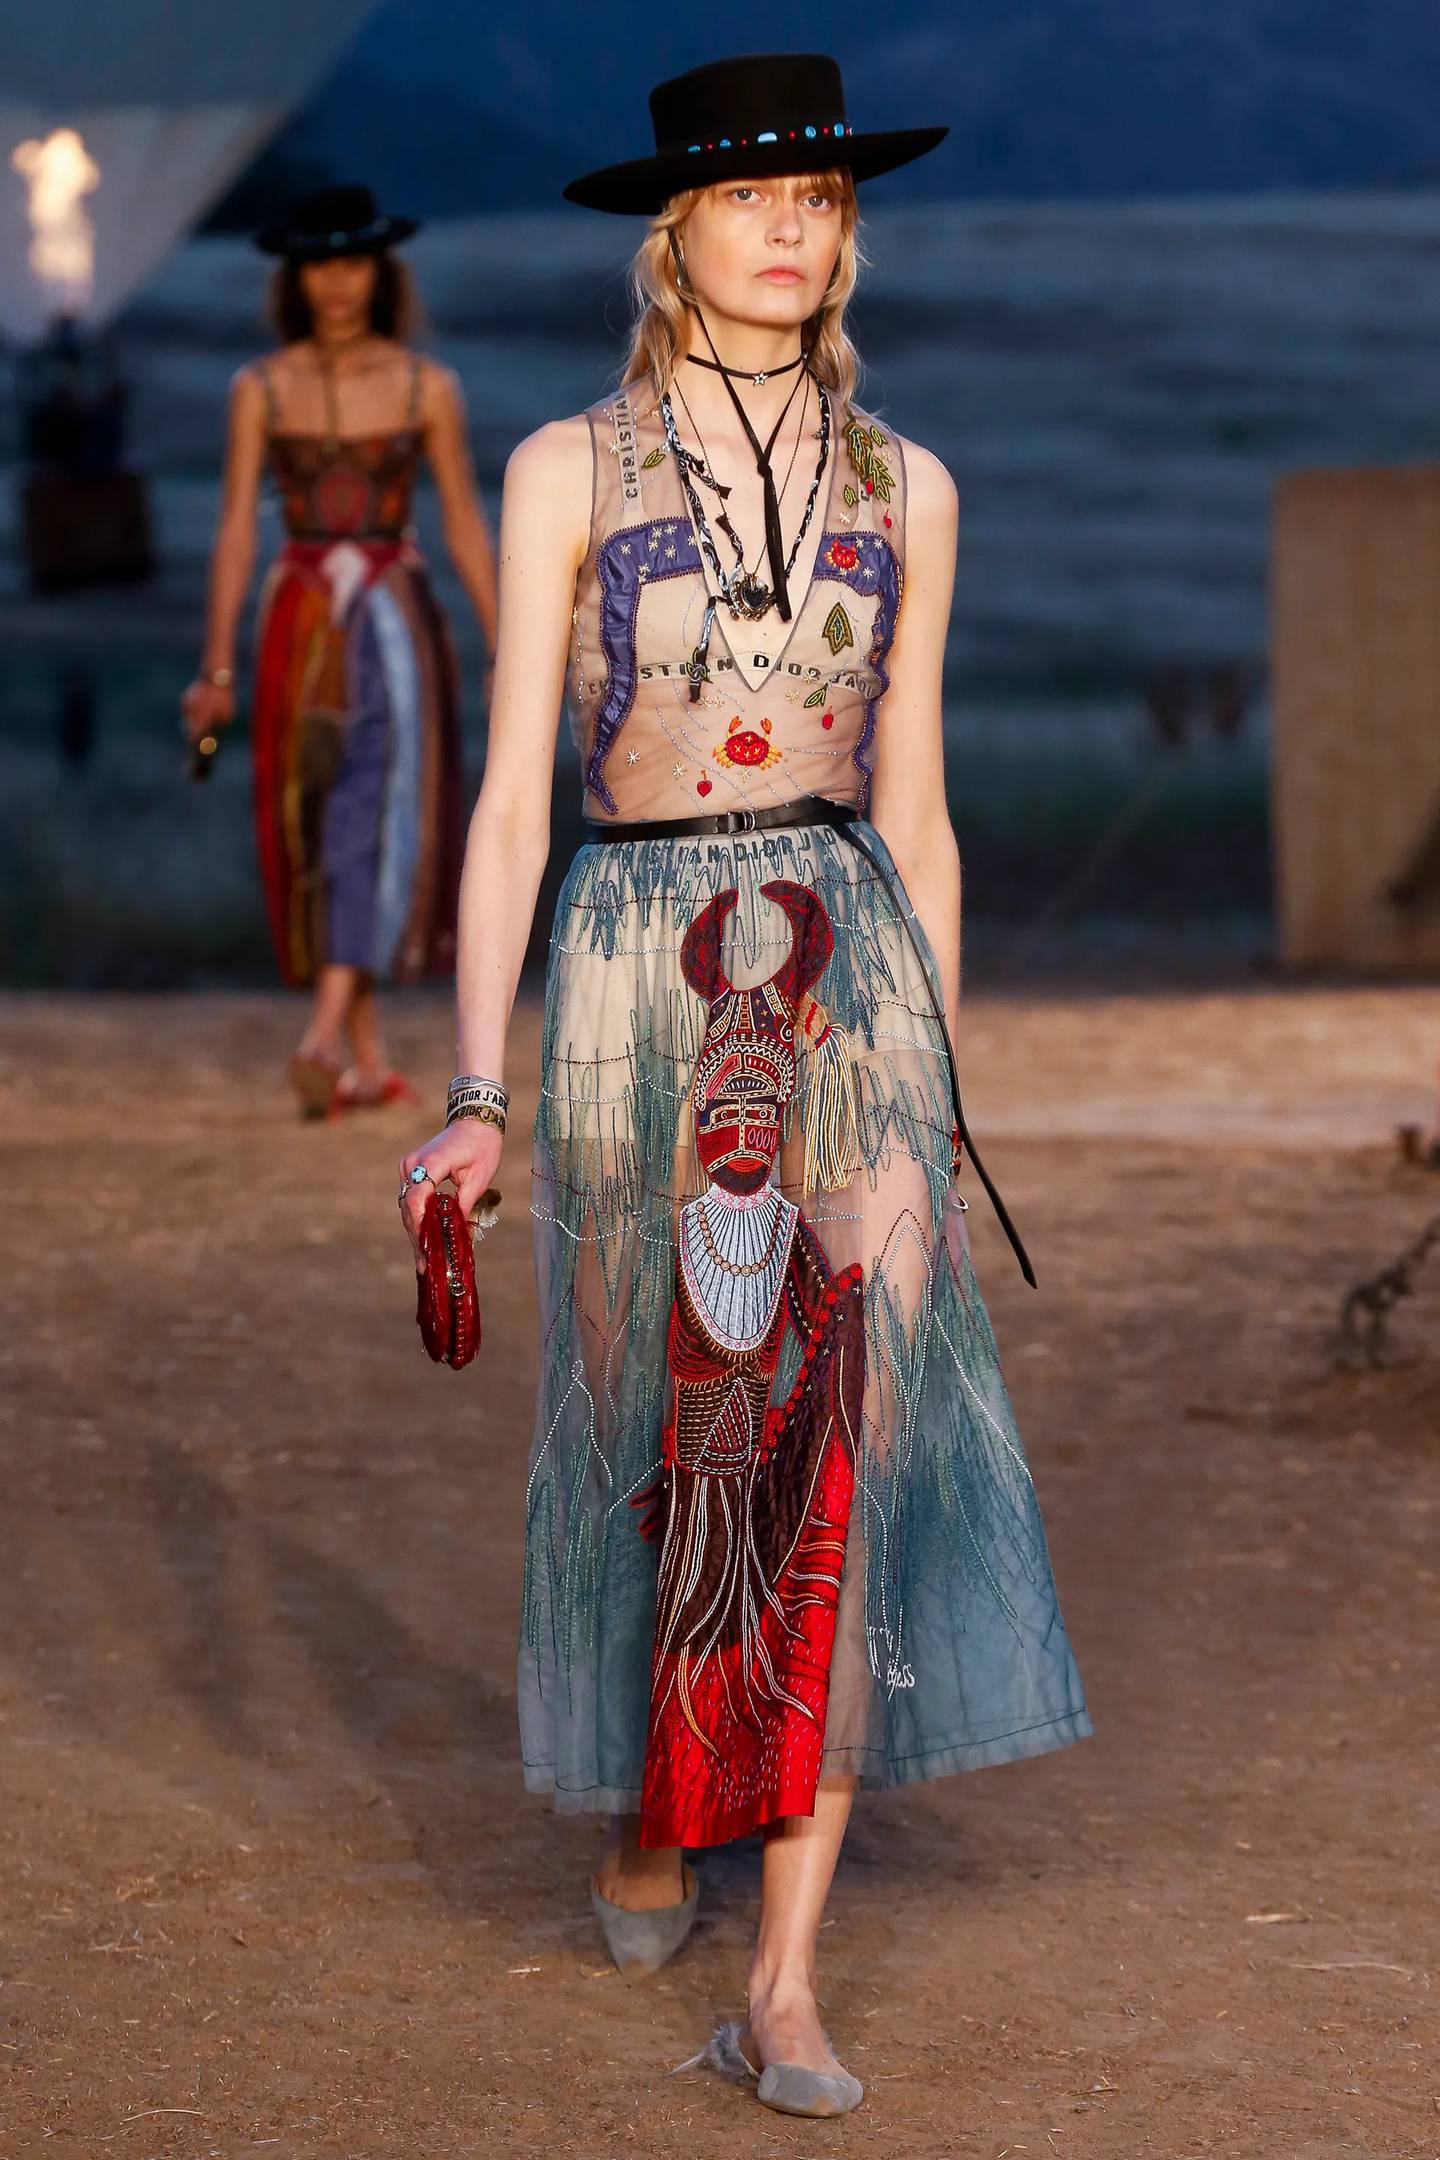 A look from Dior designer Maria Grazia Chiuri's resort 2018 collection, which experiments with illustrating the body. Photo: Dior